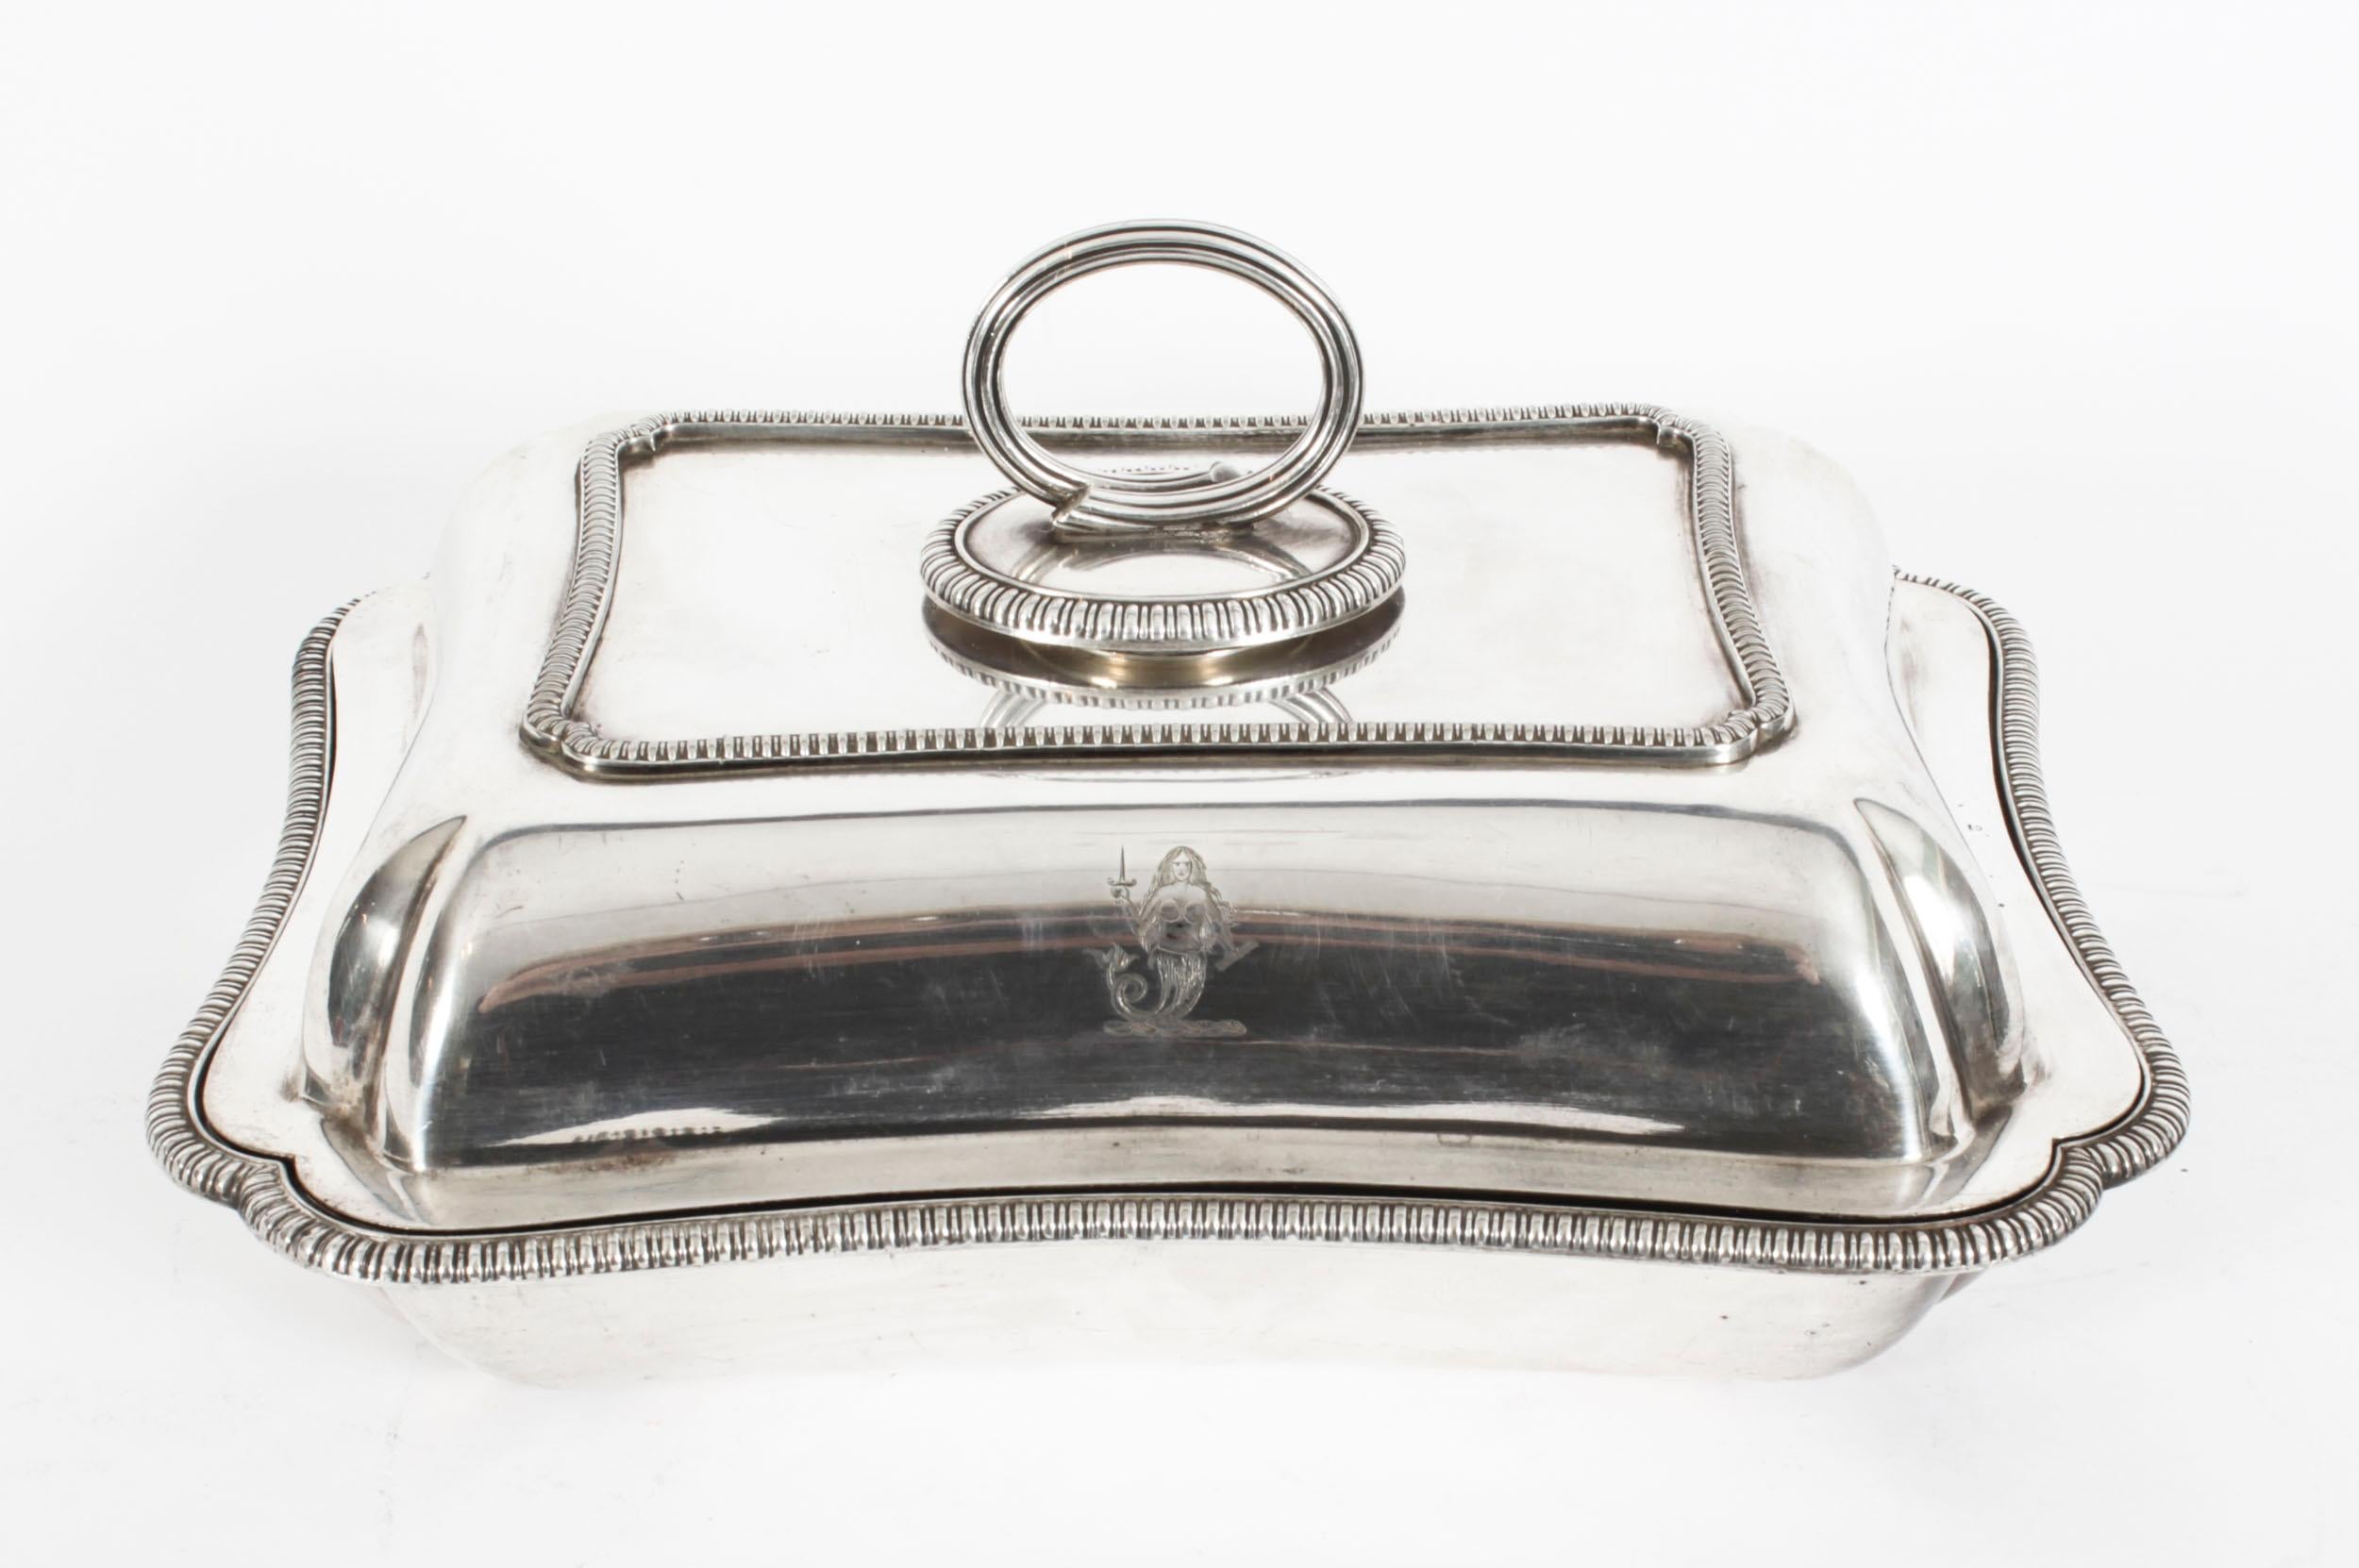 This is an exquisite and rare antique pair of English silver plated Entree dishes by the renowned silversmith Elkington & Co, and dated 1888.
 
The dishes feature a rectangular shape with delightful matching gadrooned rims to the lid and dish,